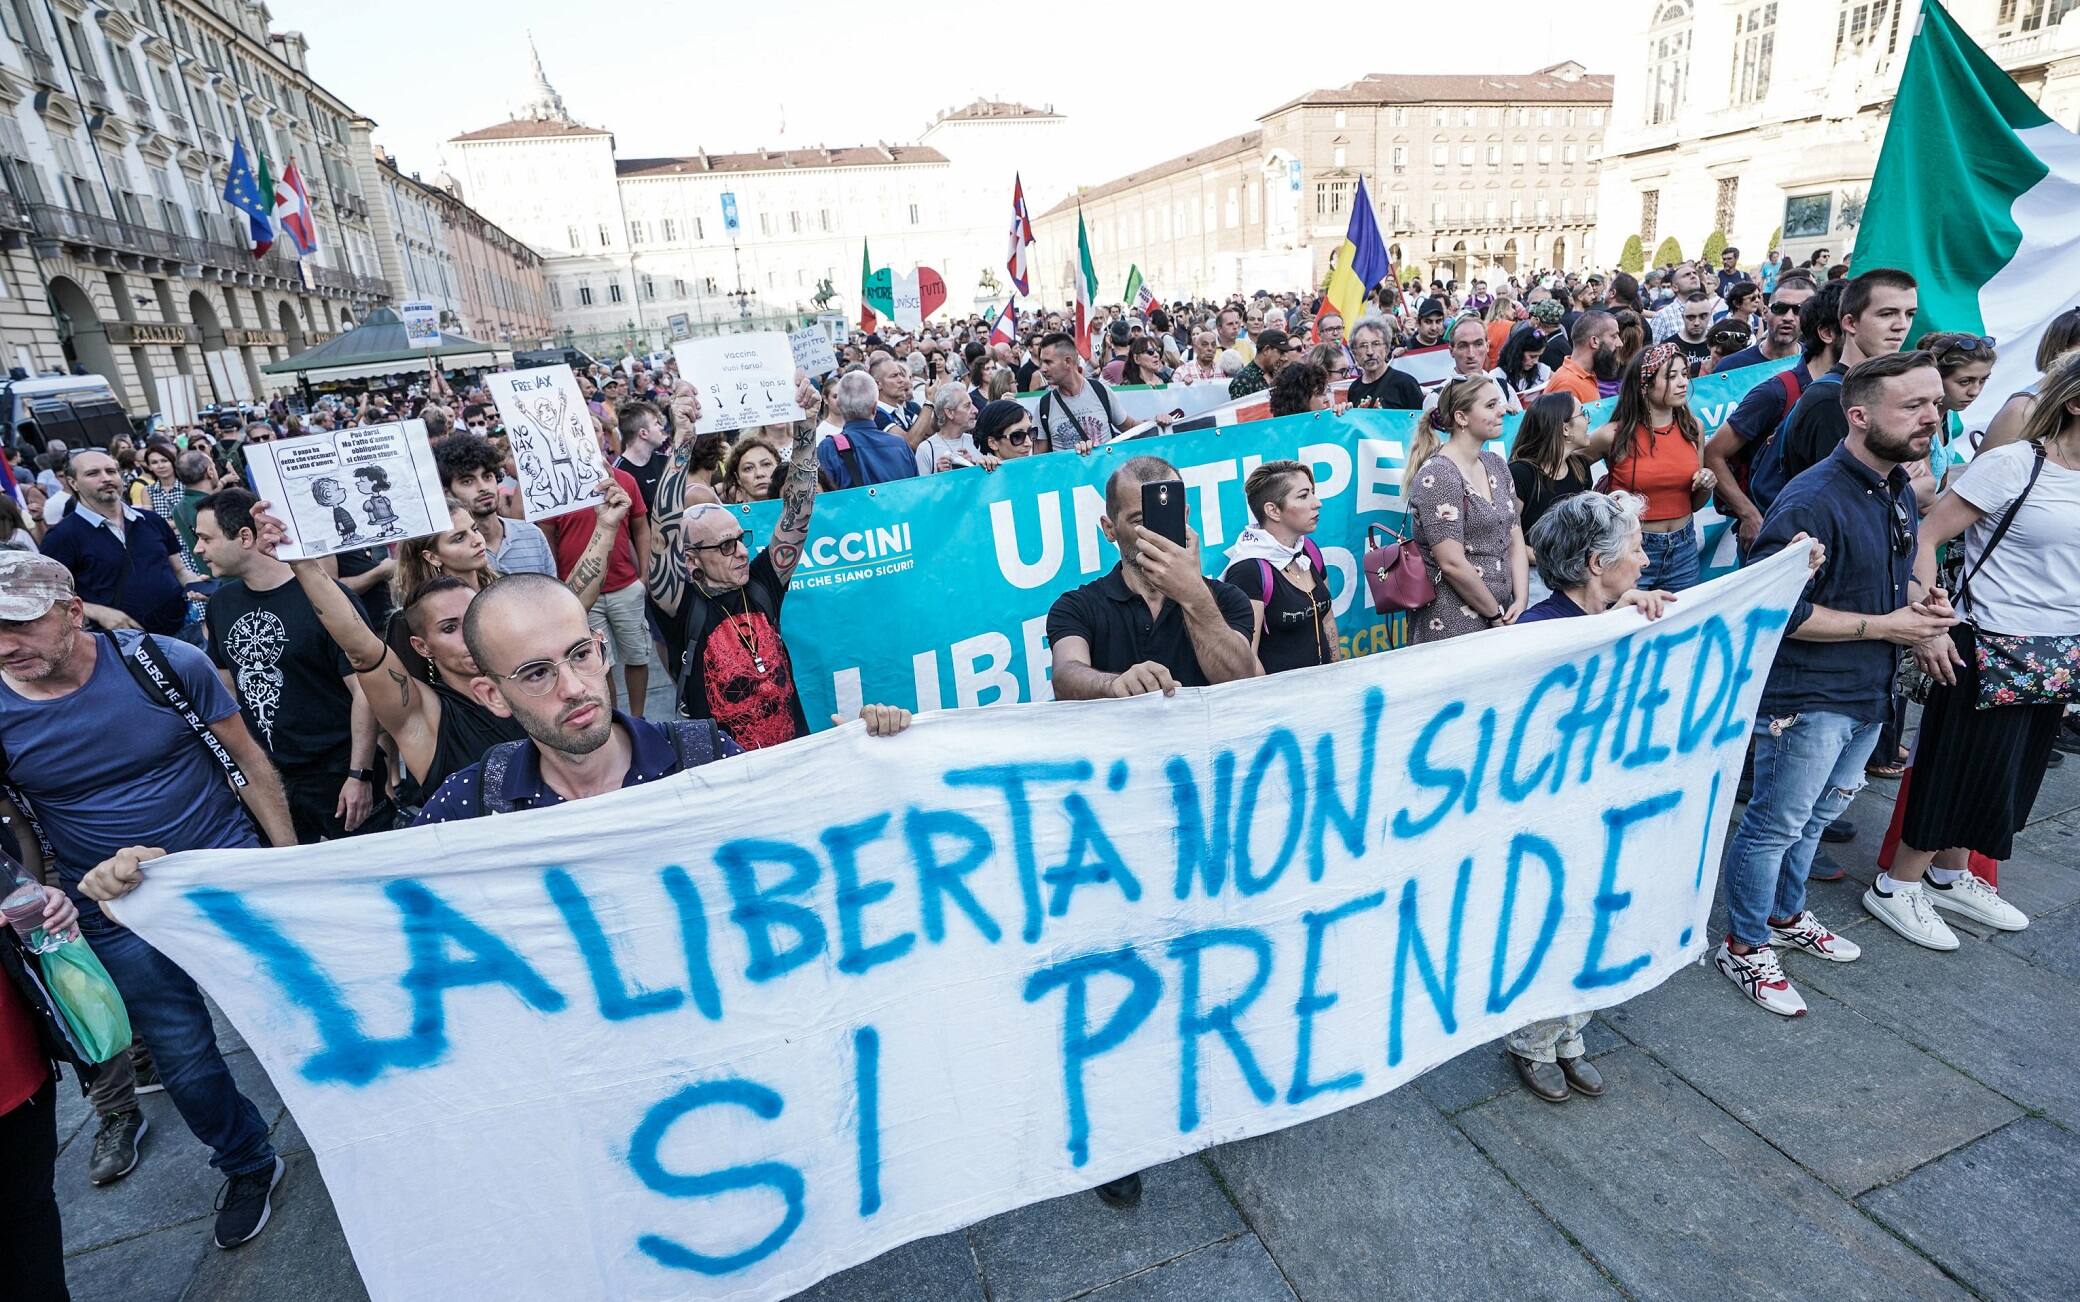 A moment of the protest 'No green pass' in Turin, 11 September 2021. ANSA/TINO ROMANO